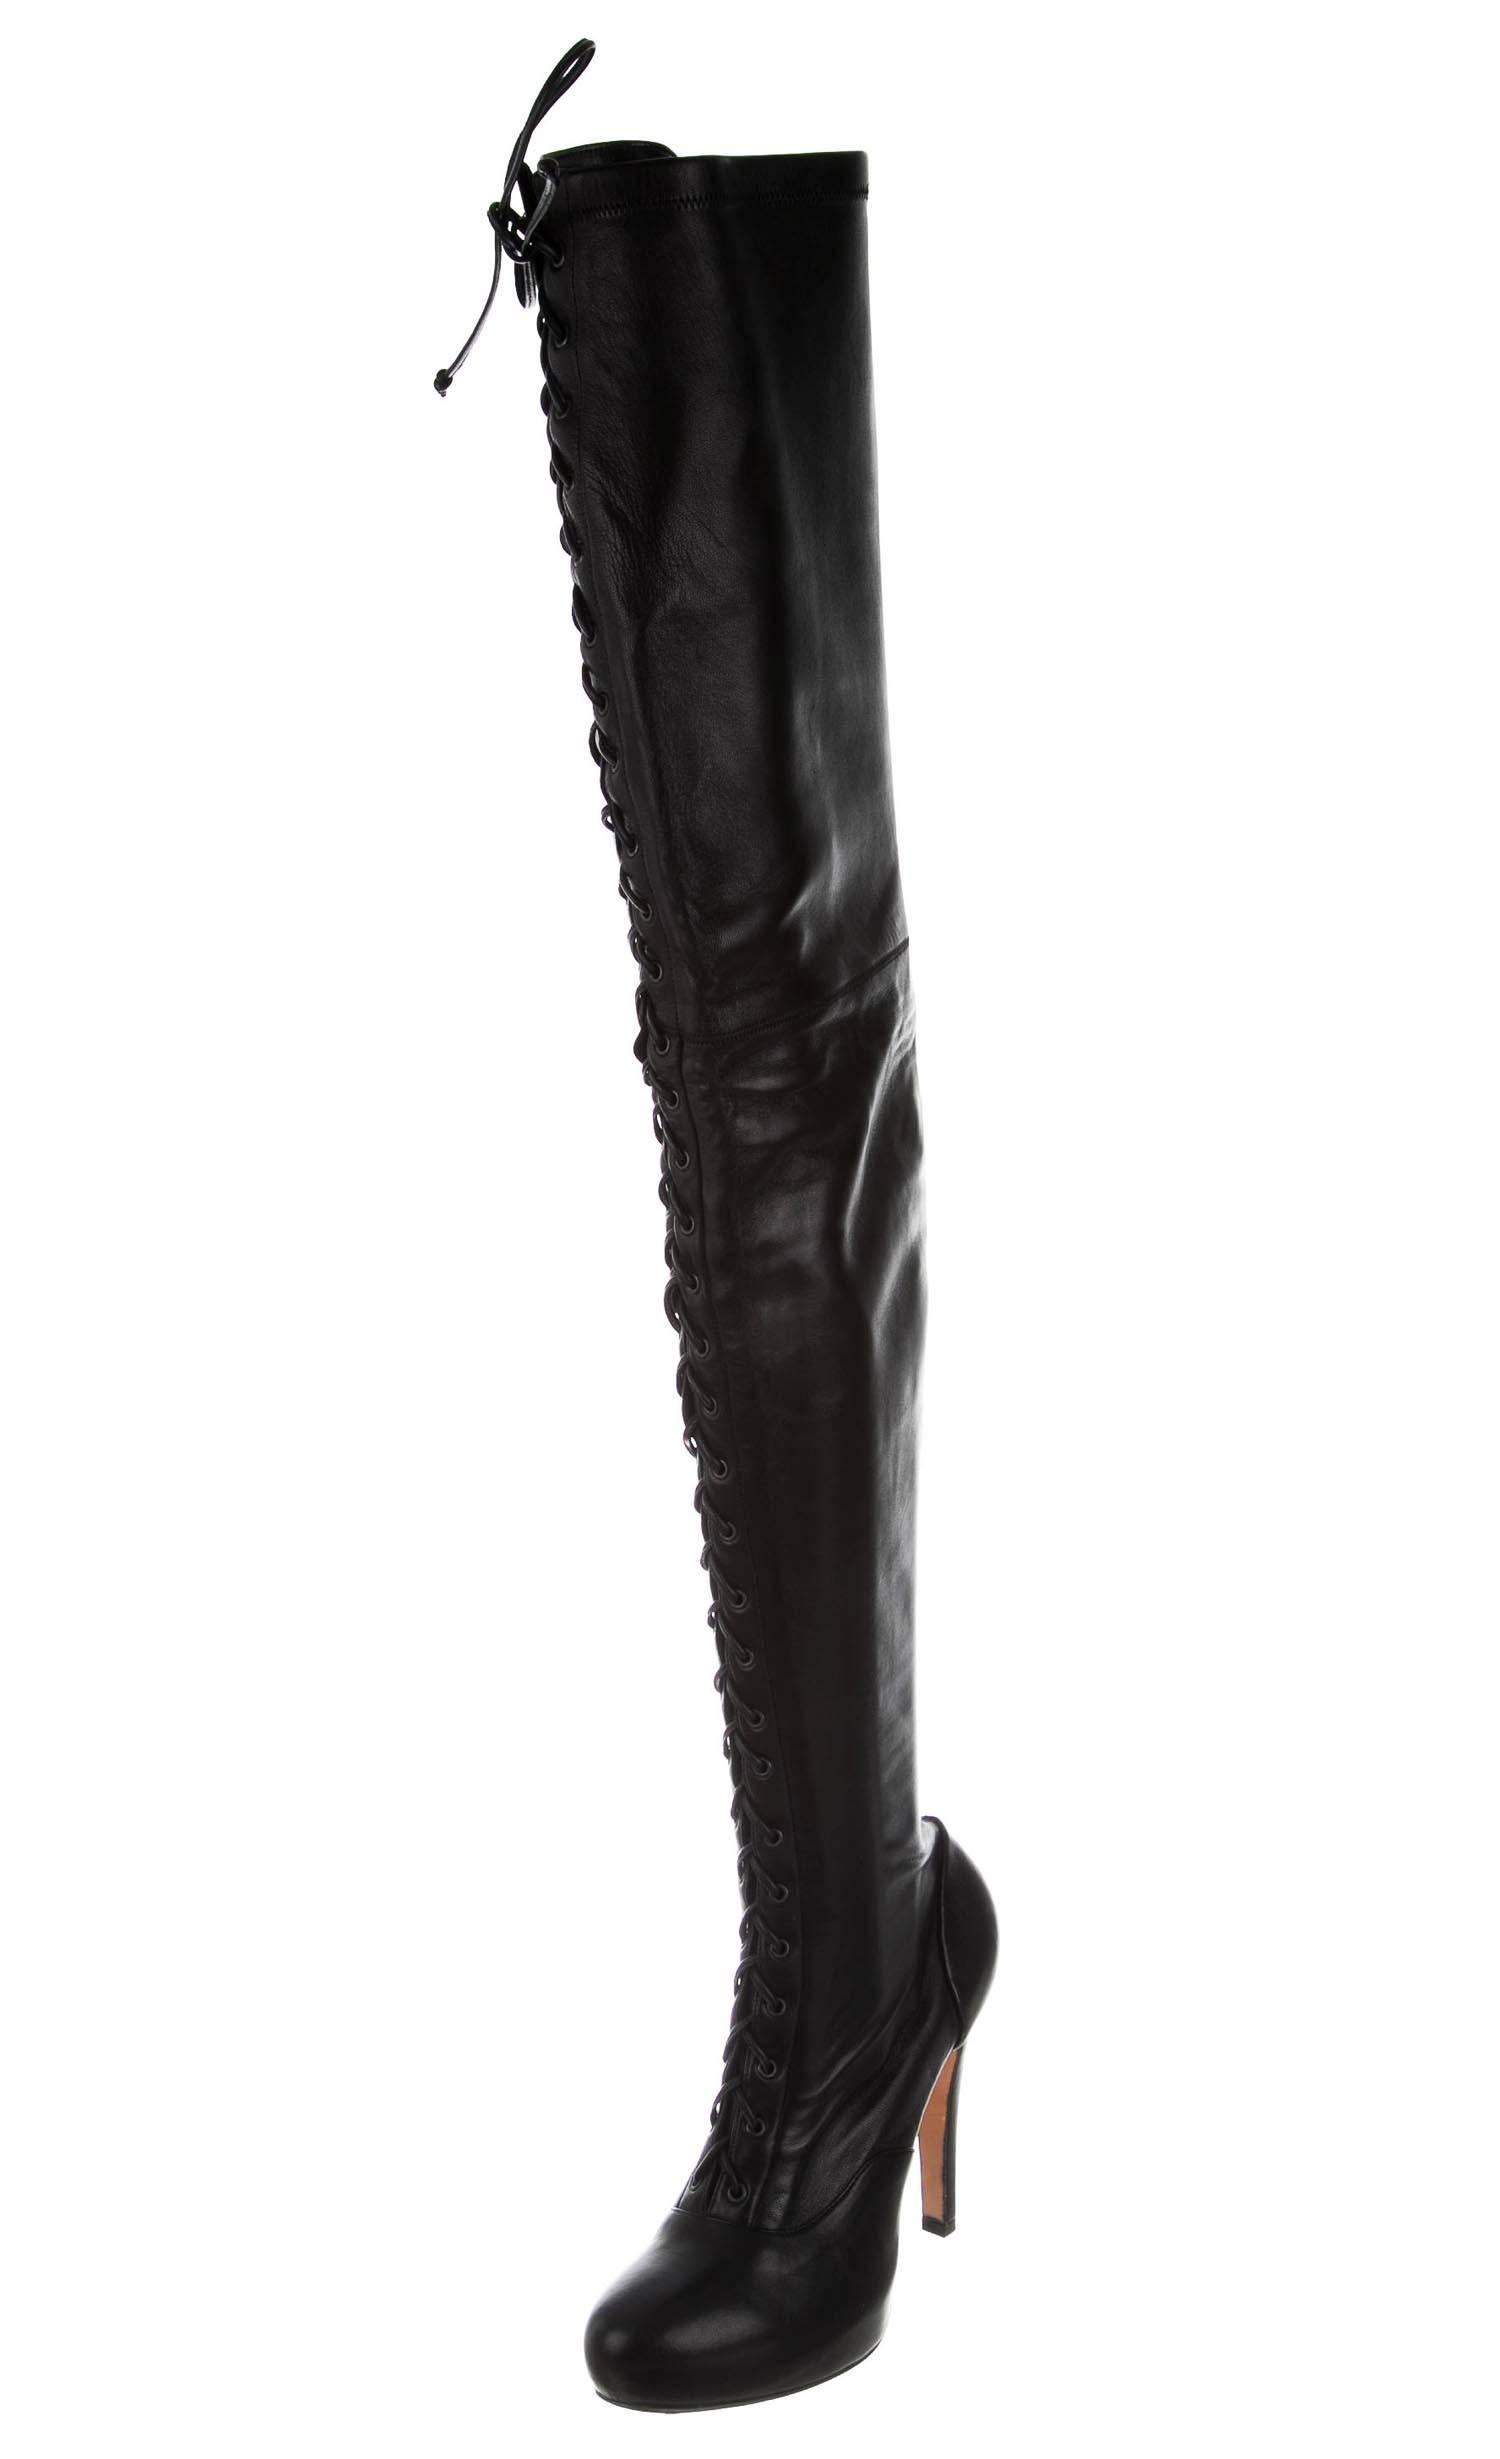 Women's New ETRO Leather Lace-up Thigh-High Platform Black Hell Boots It.39 - US 9